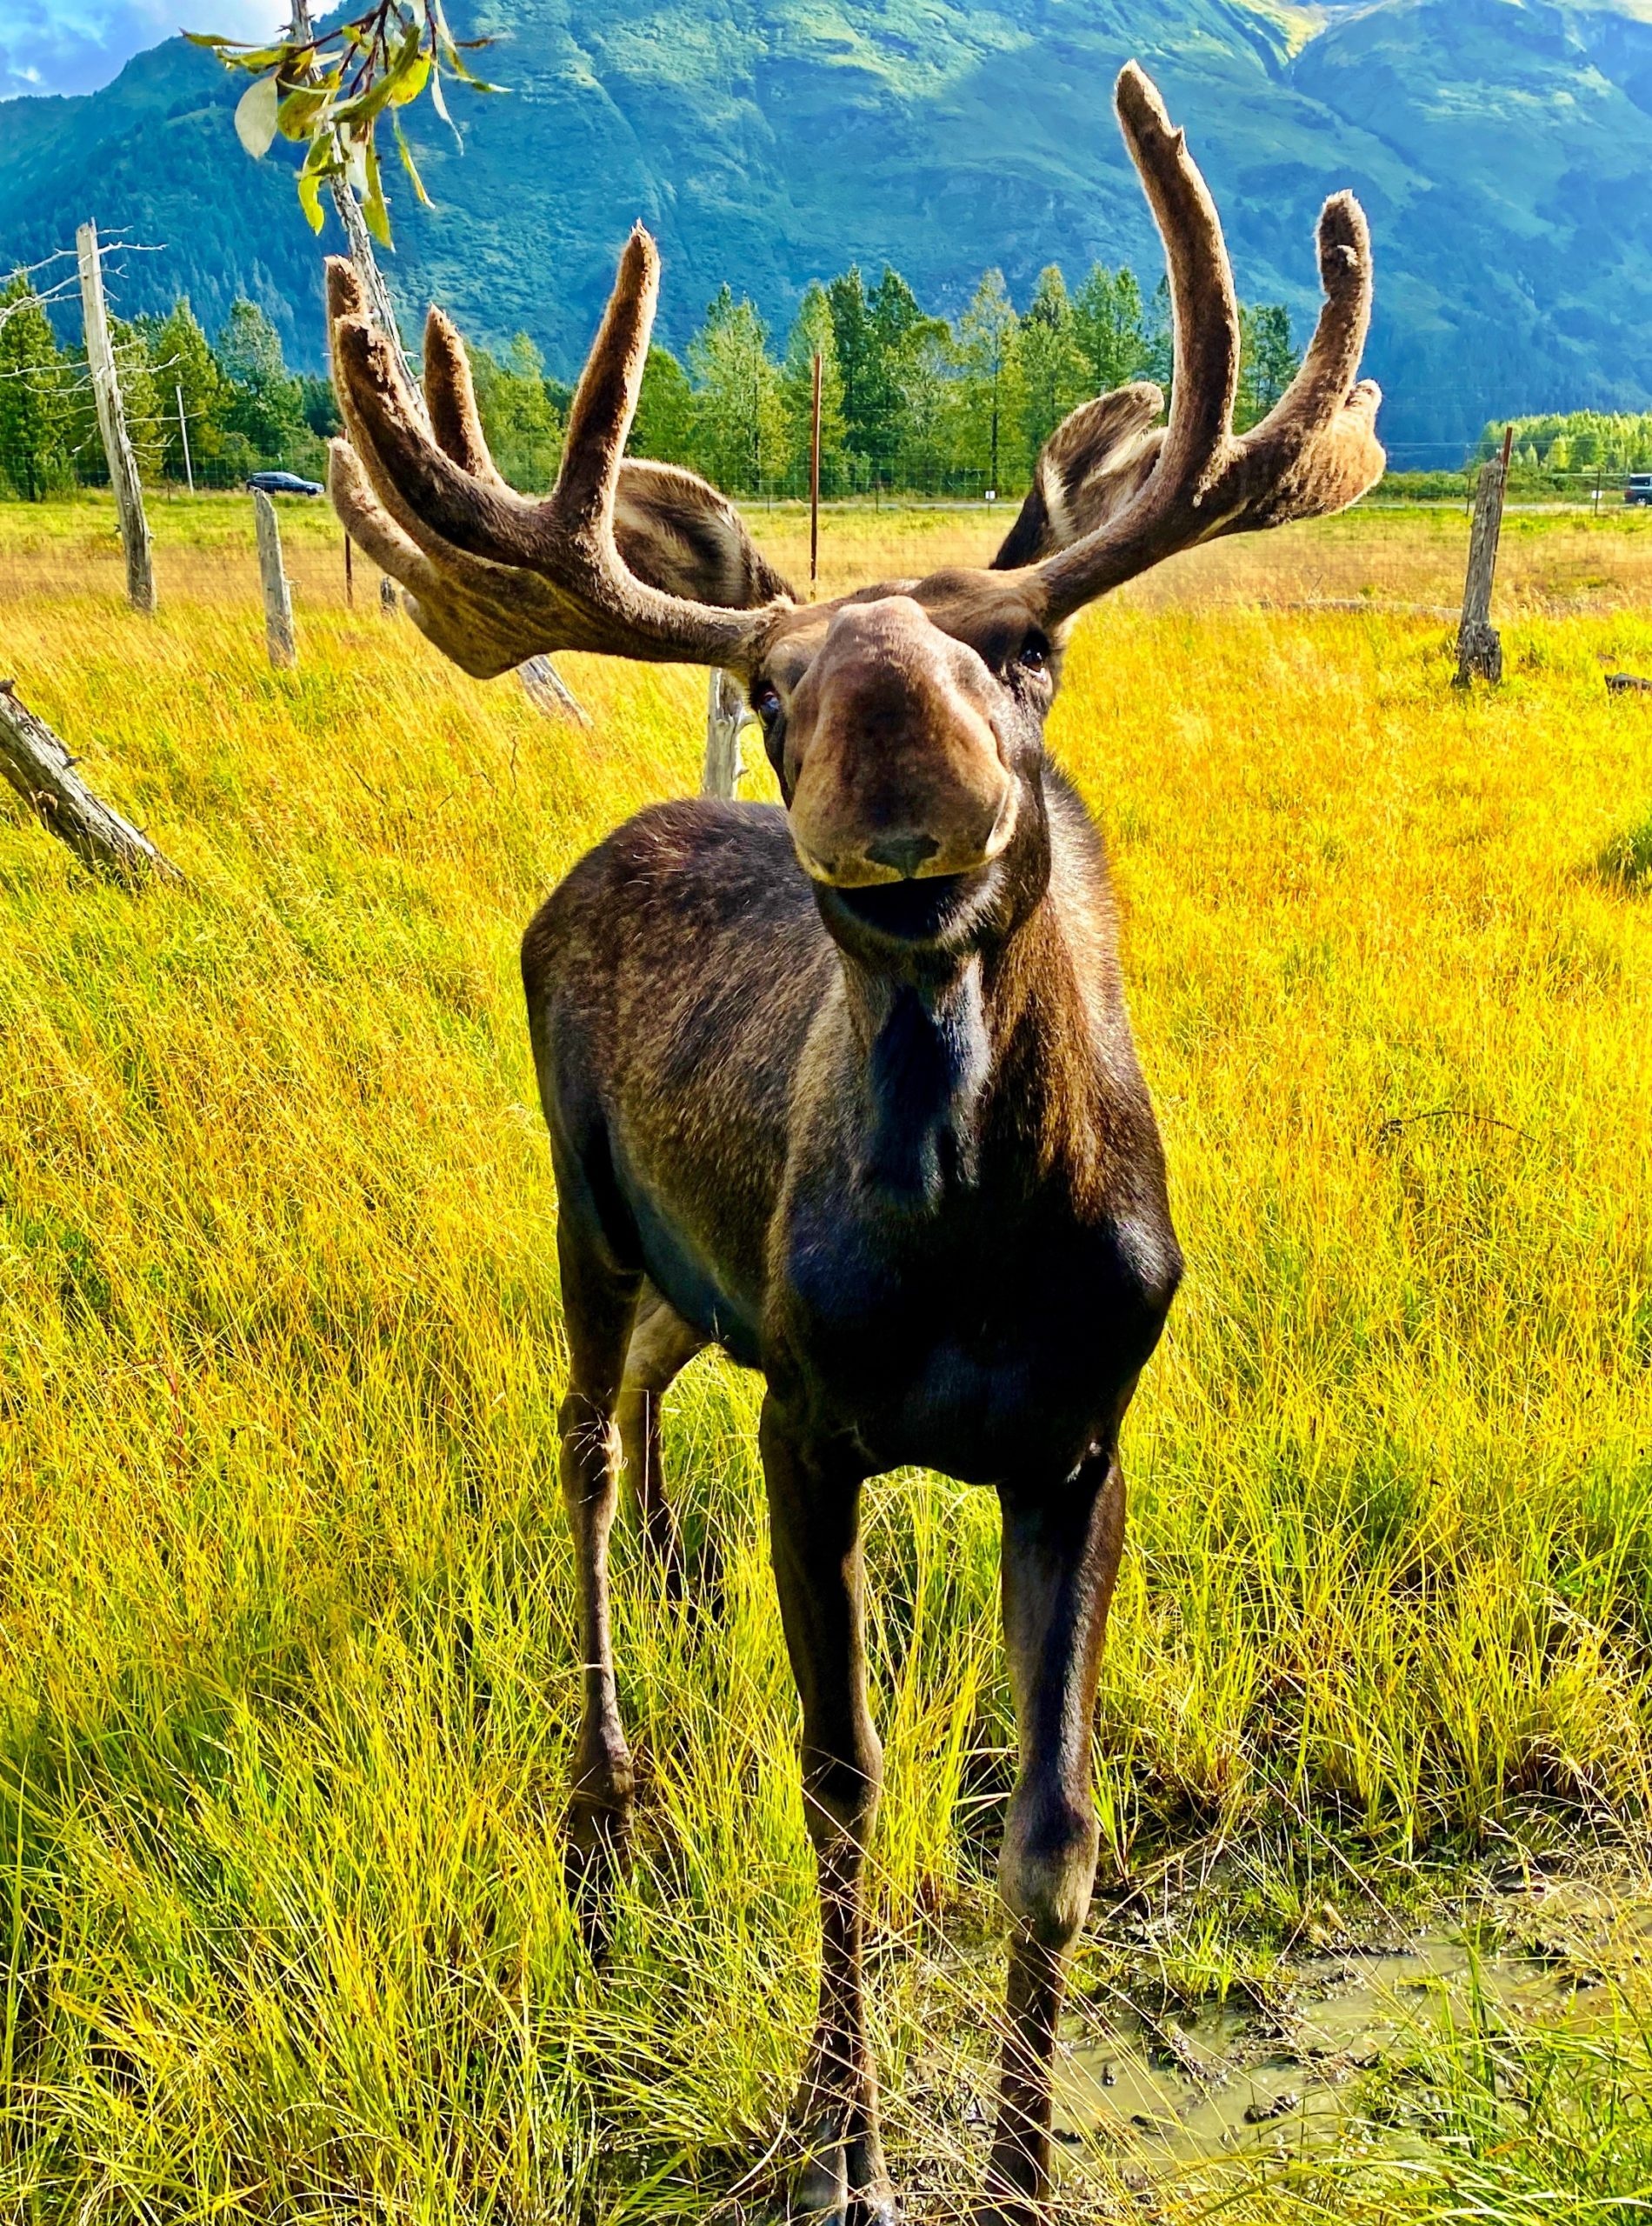 Adopt a moose, Wildlife conservation, Support nature, Unique opportunity, 1900x2560 HD Phone